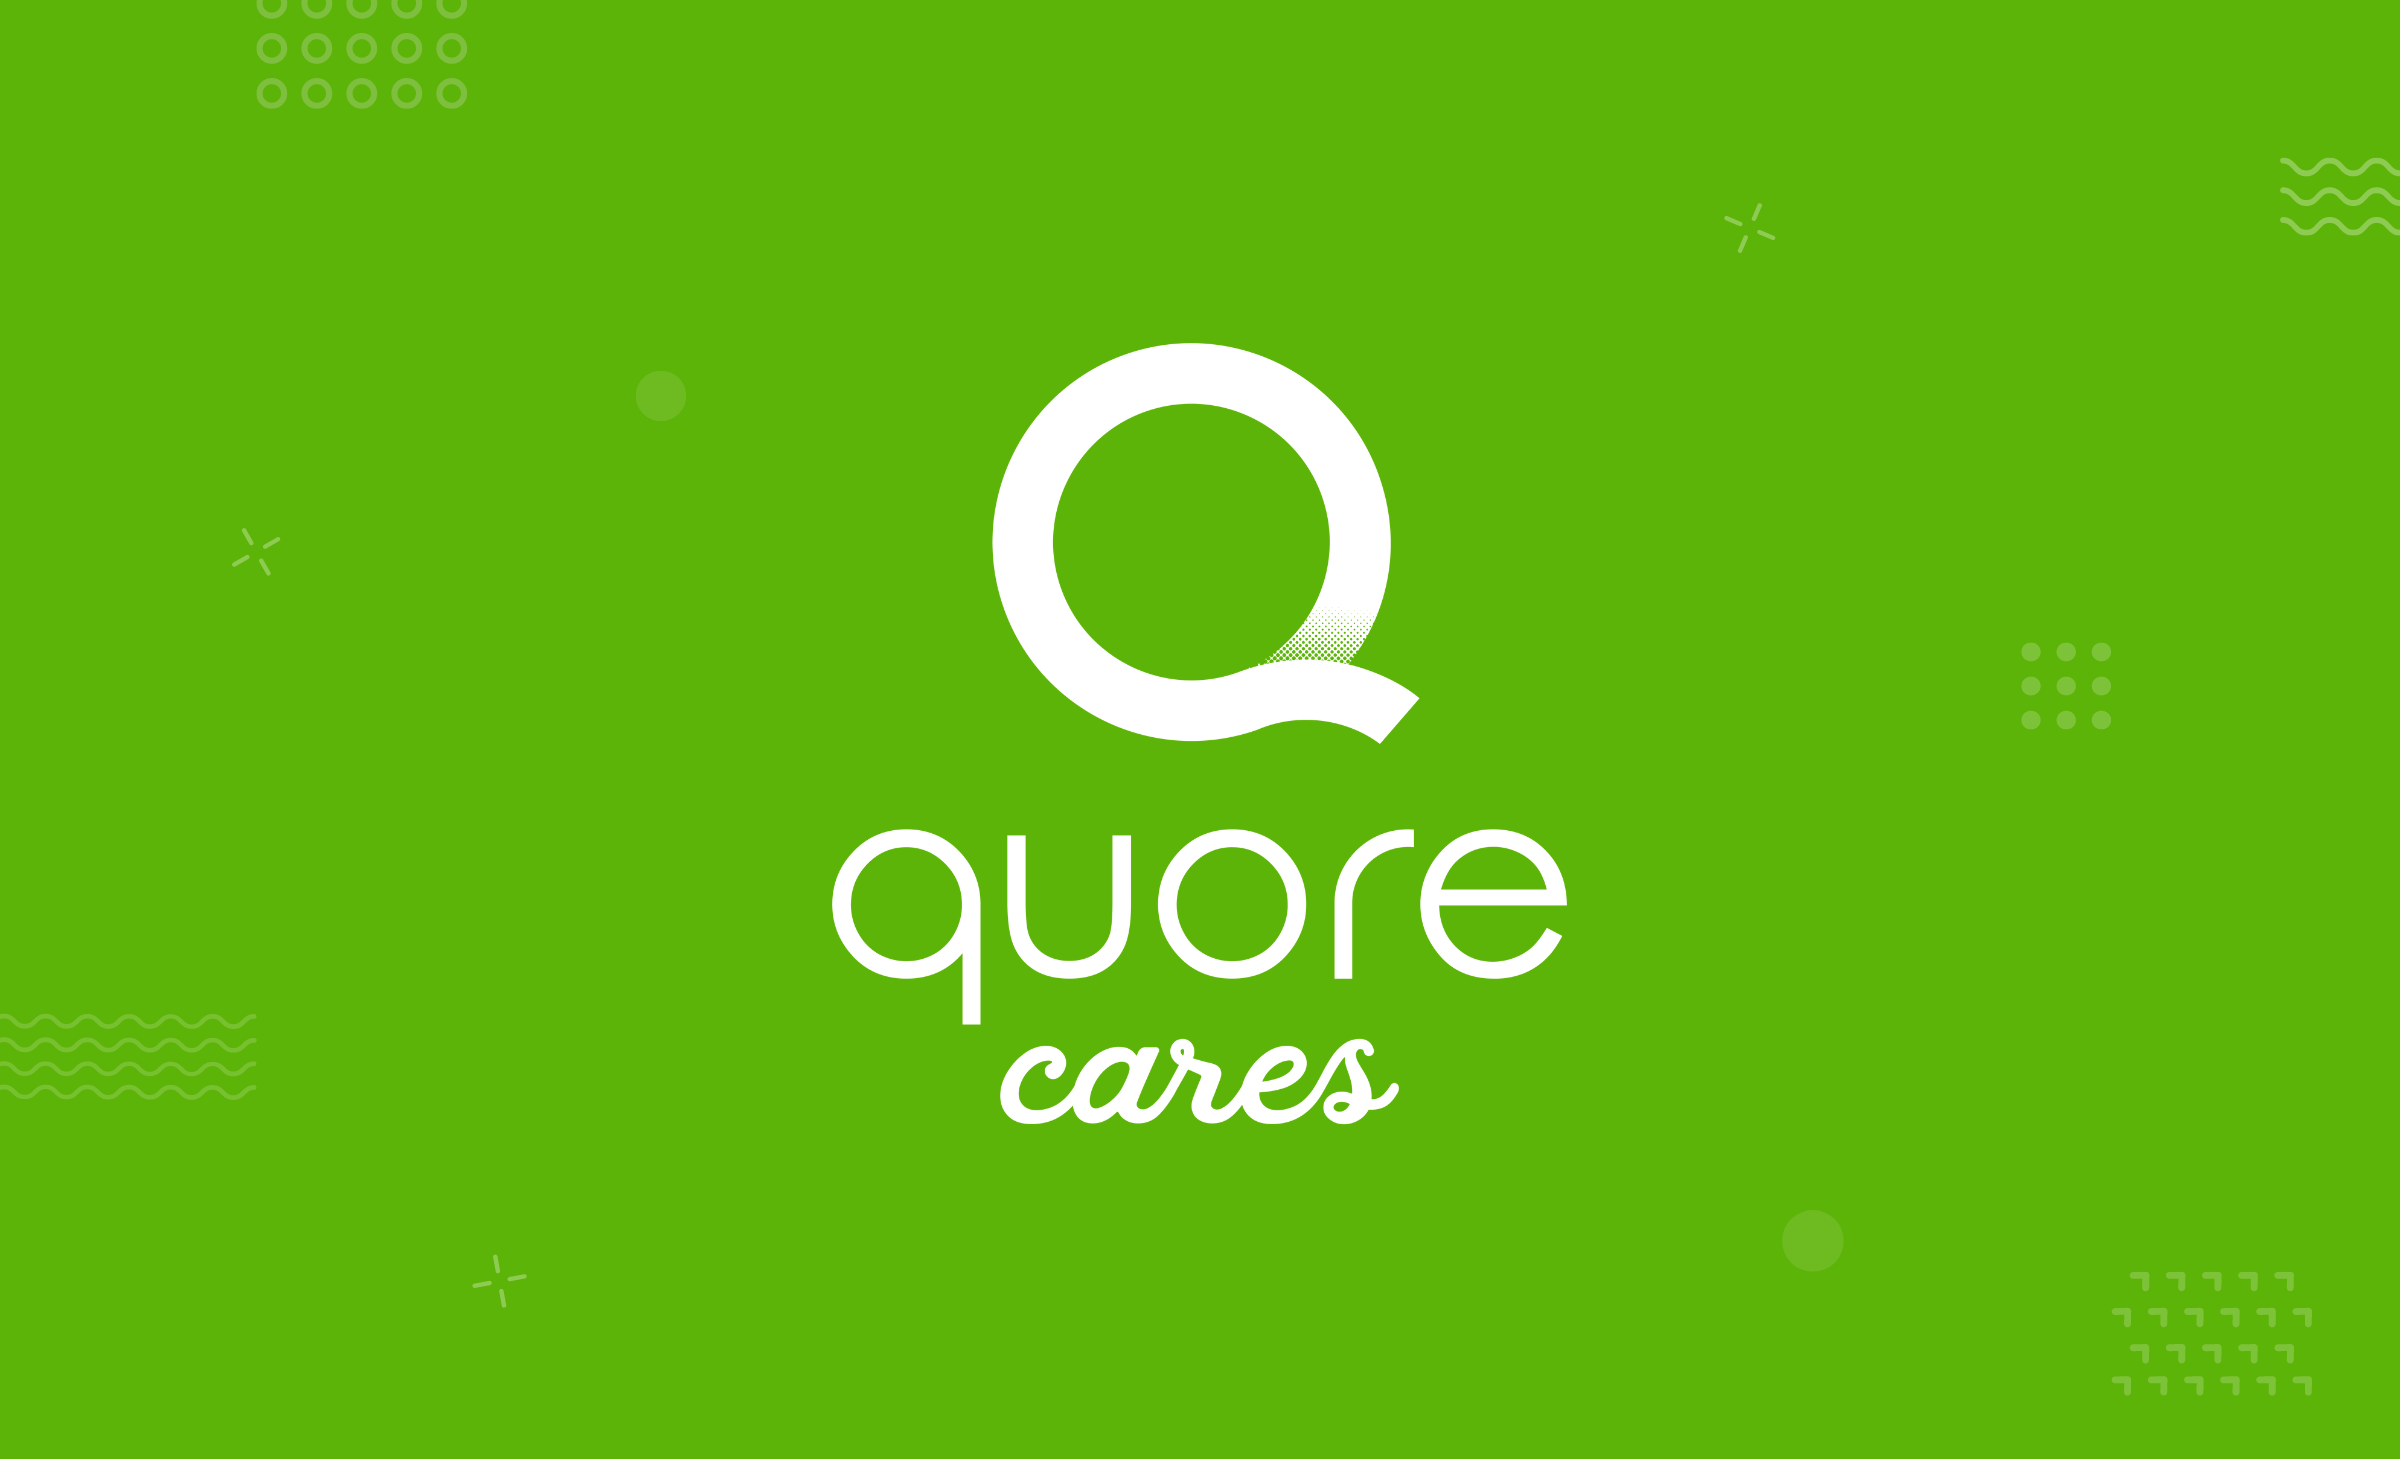 Quore Cares About Giving Back